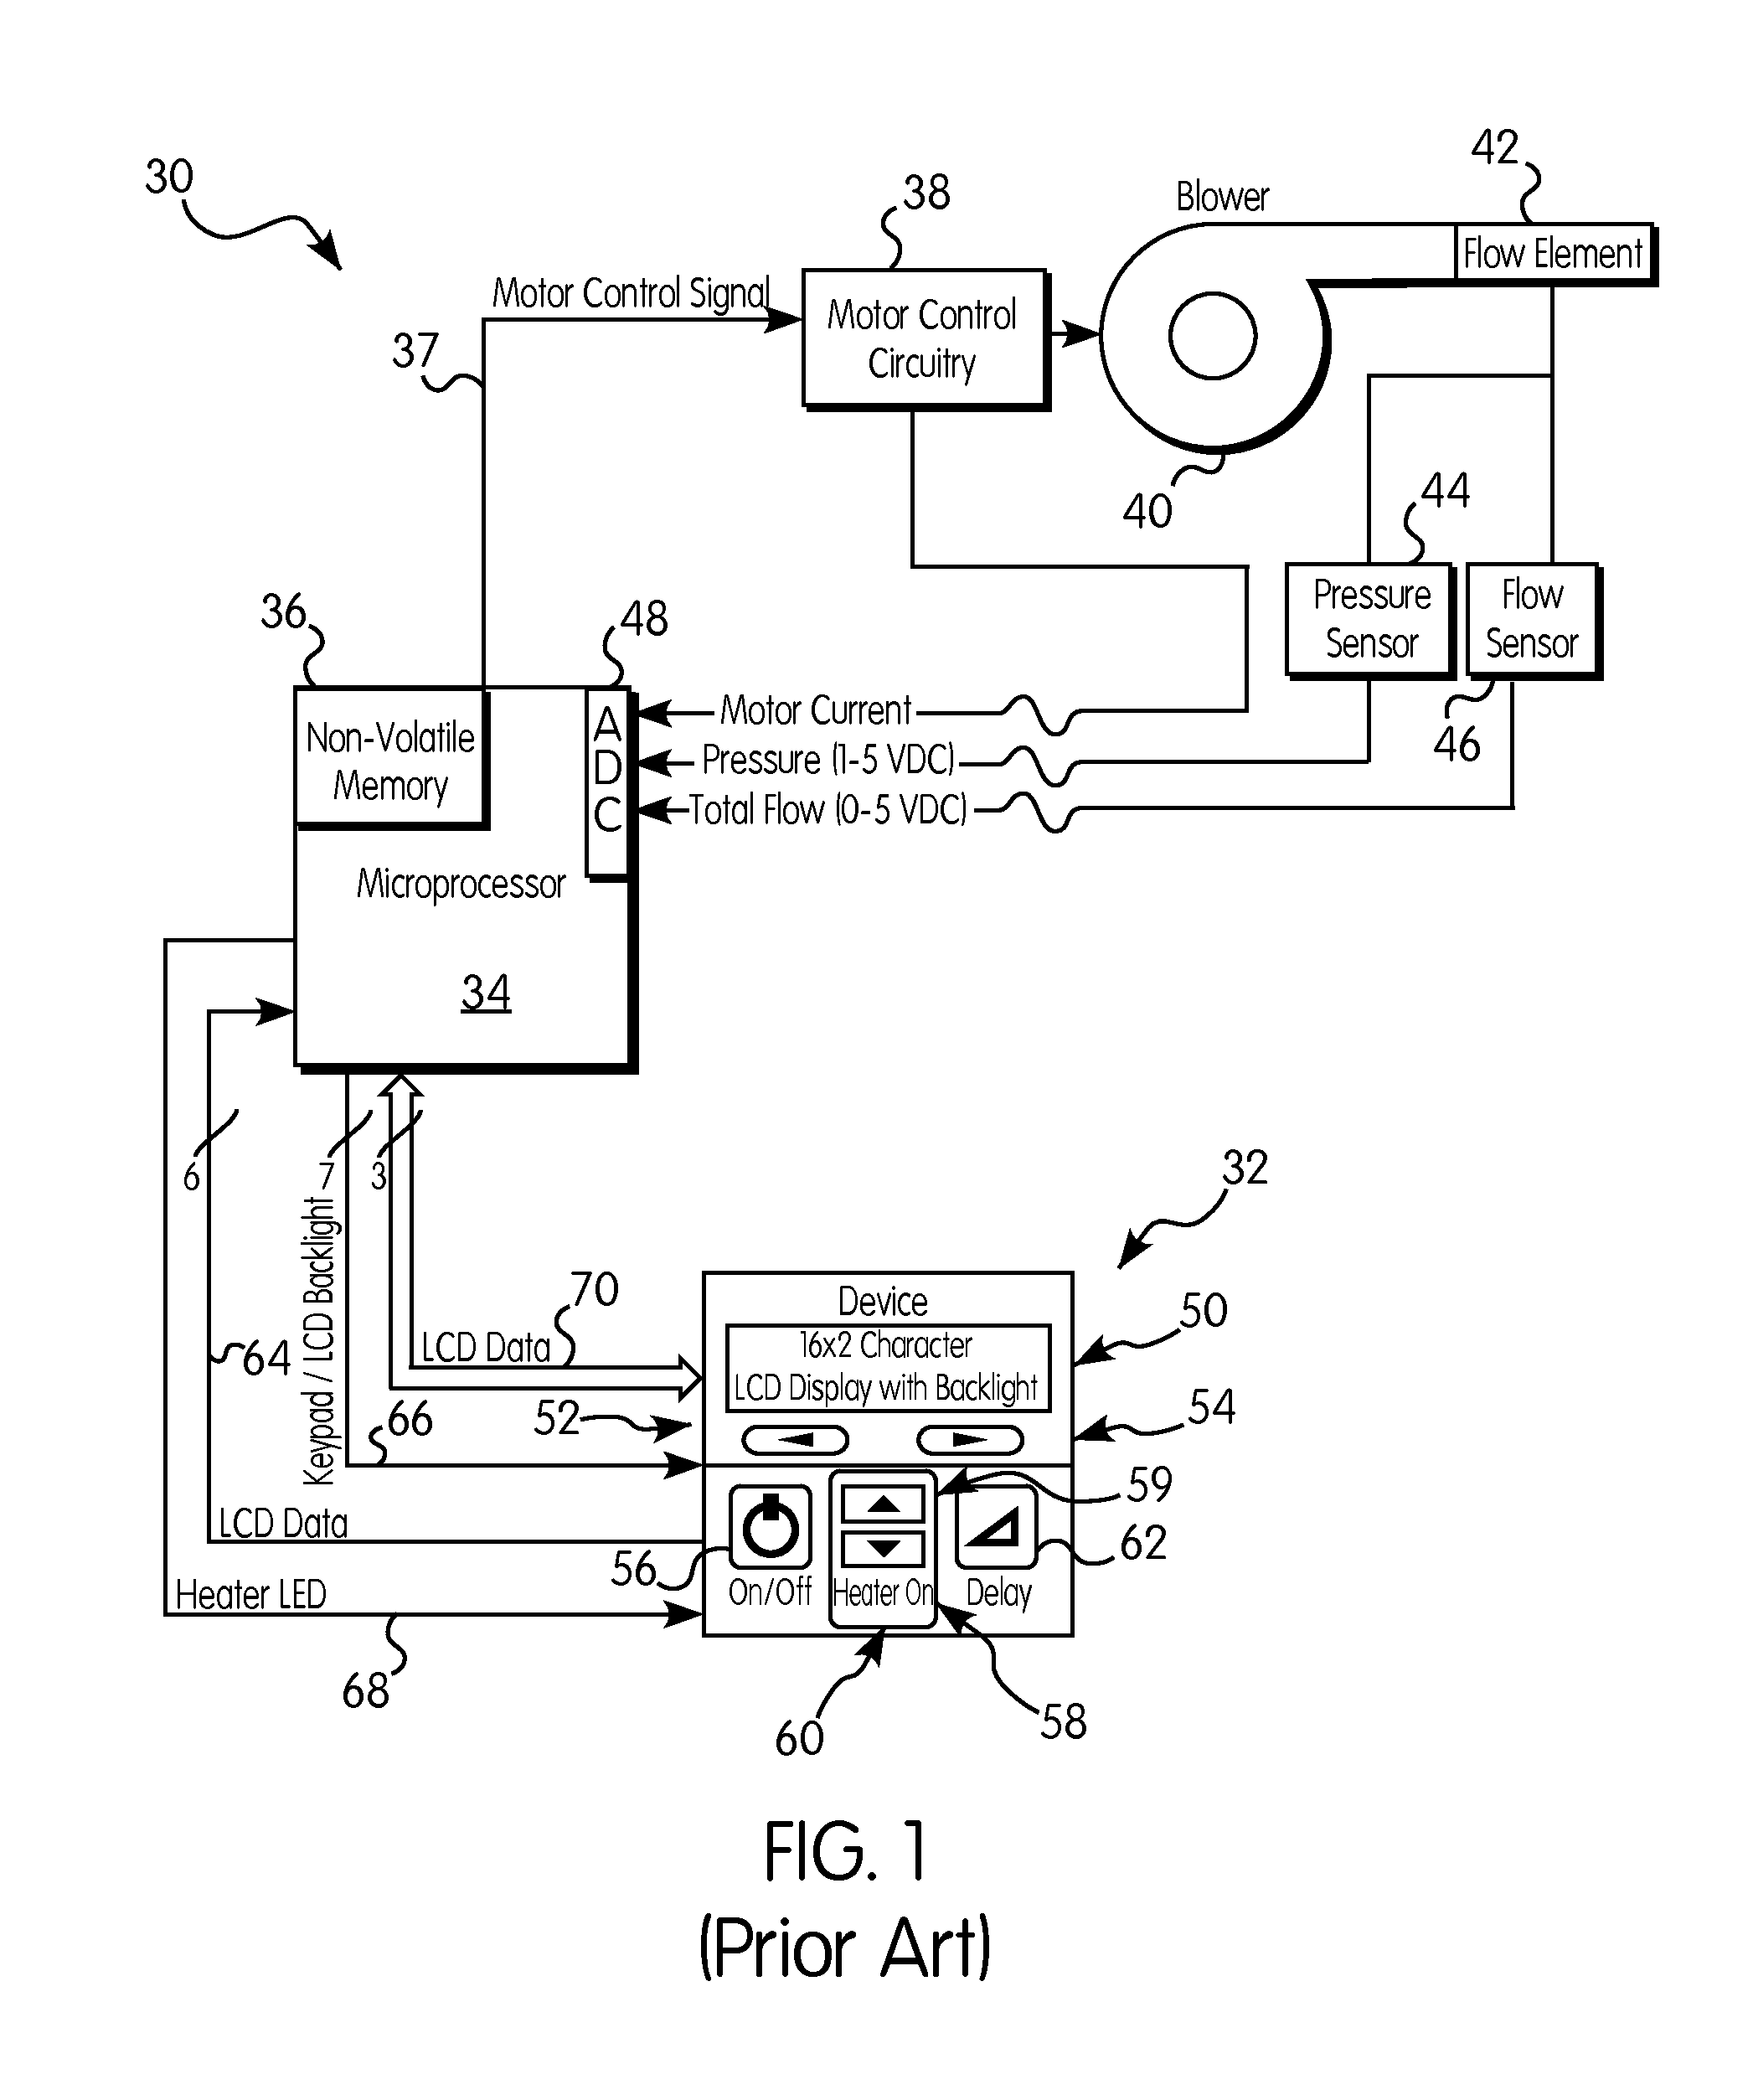 Variable Transition Pressure Profiles for a Bi-Level Breathing Therapy Machine